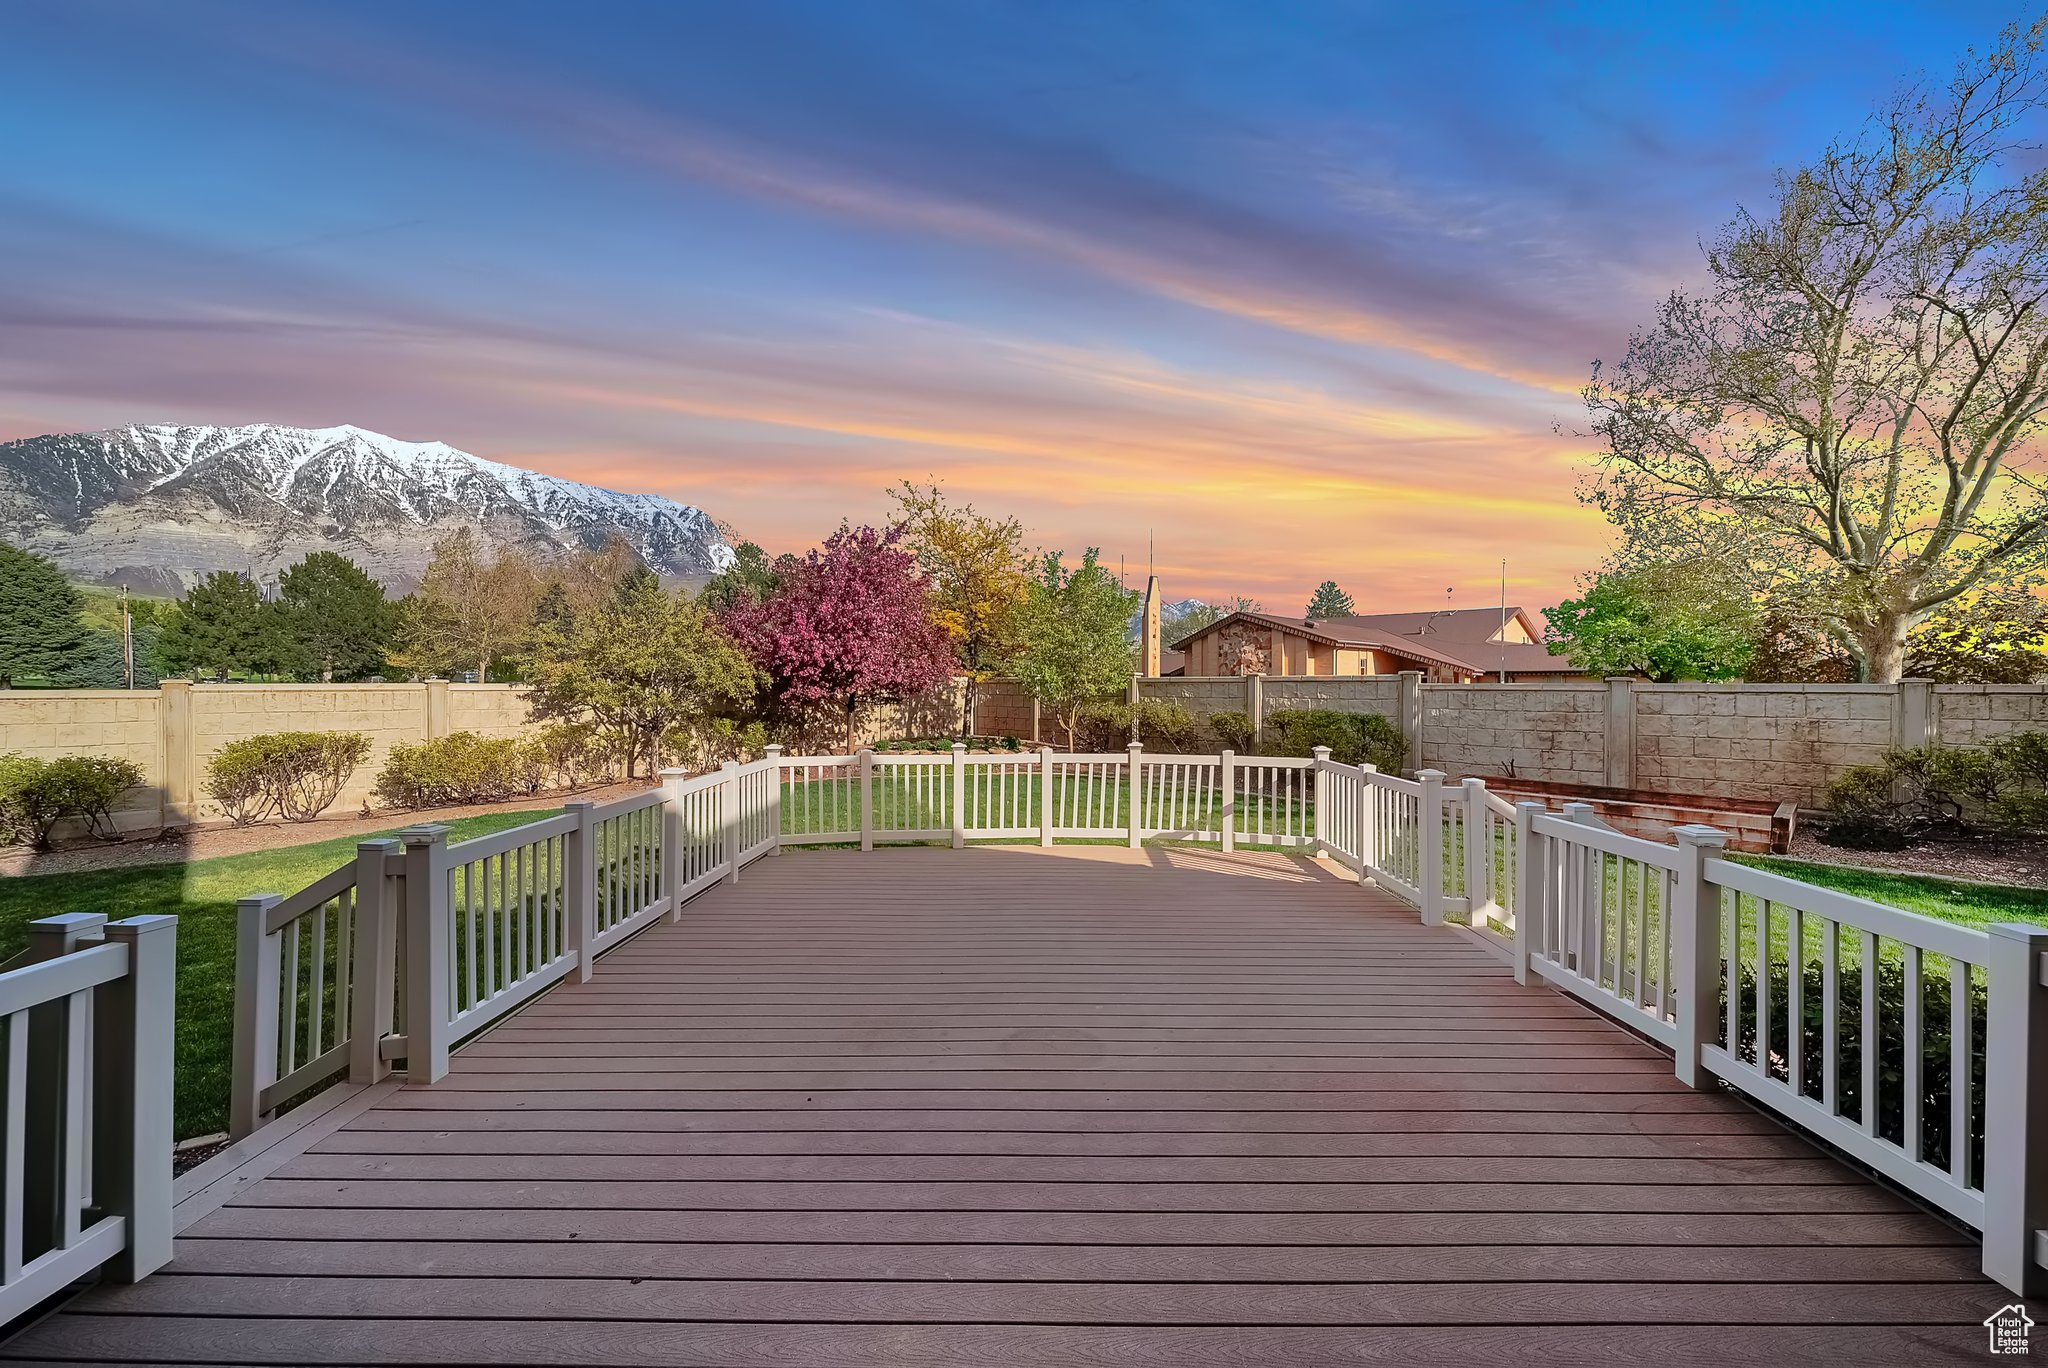 Deck at dusk with a mountain view